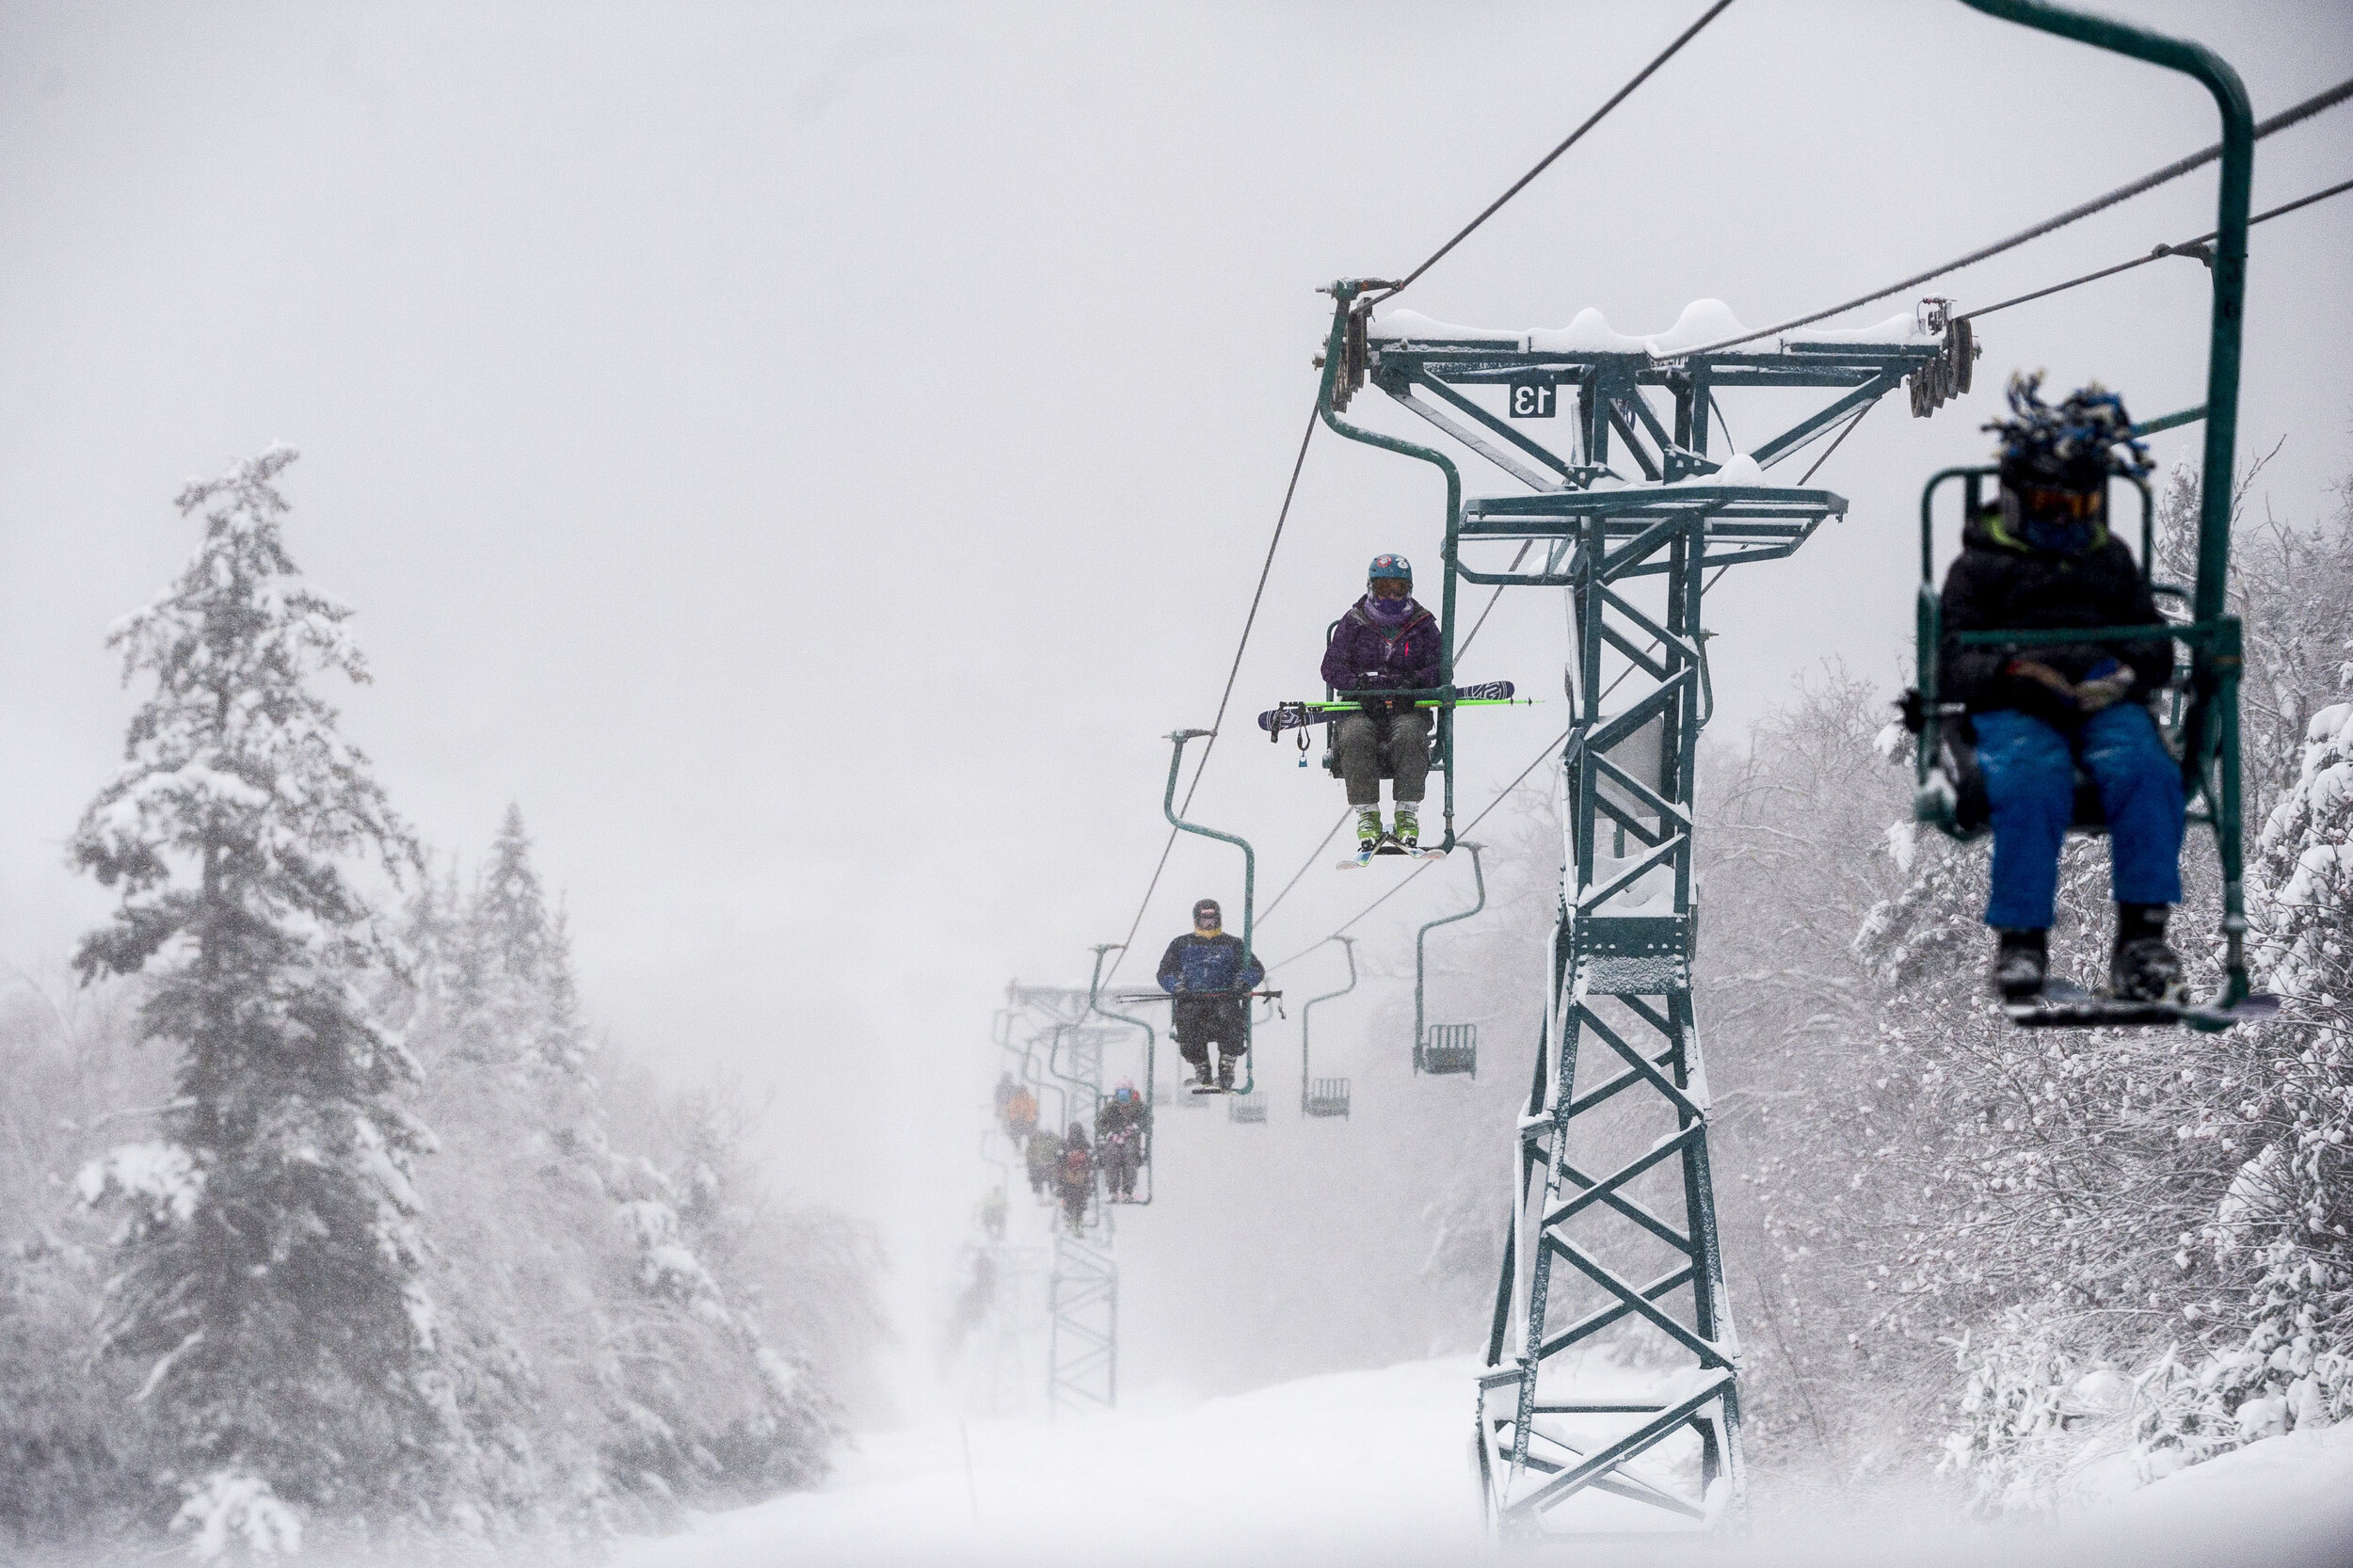  Skiers ride the single-chair lift to take advantage of fresh snowfall at Mad River Glen on Tuesday, December 26th 2017 in Waitsfield, VT. 